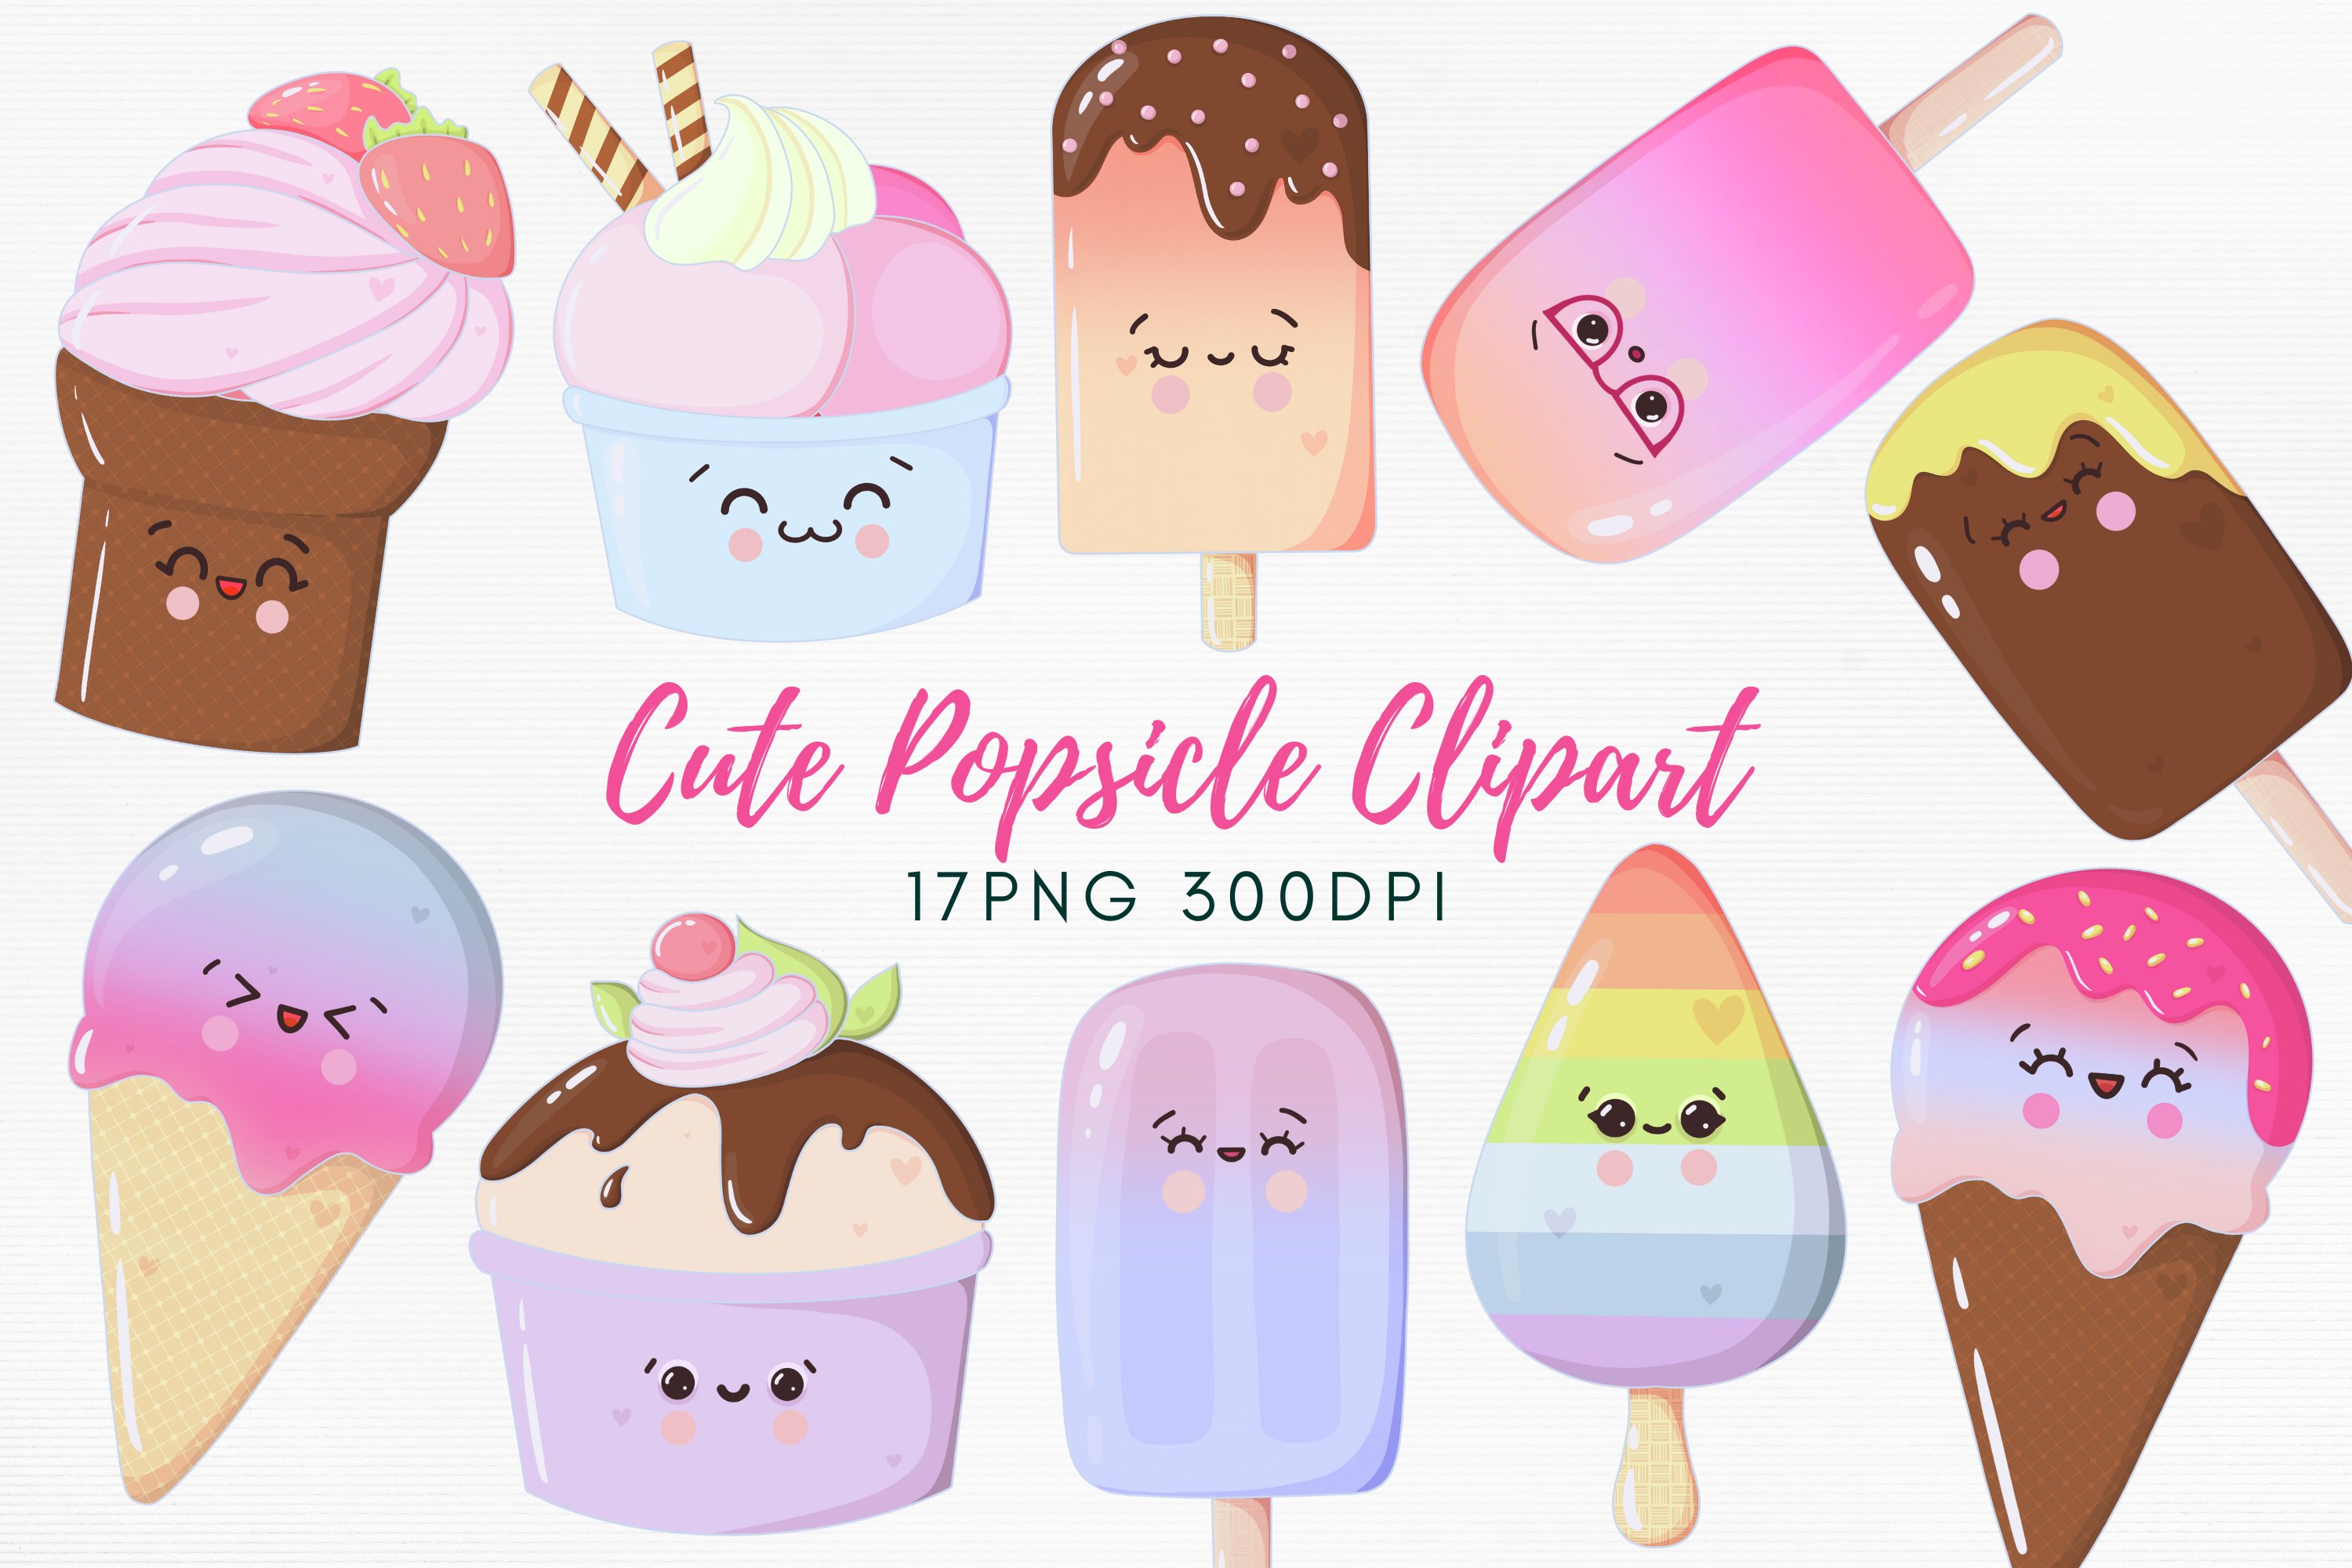 Pink lettering "Cute Popsicle CLipart" and different illustrations on a gray background.